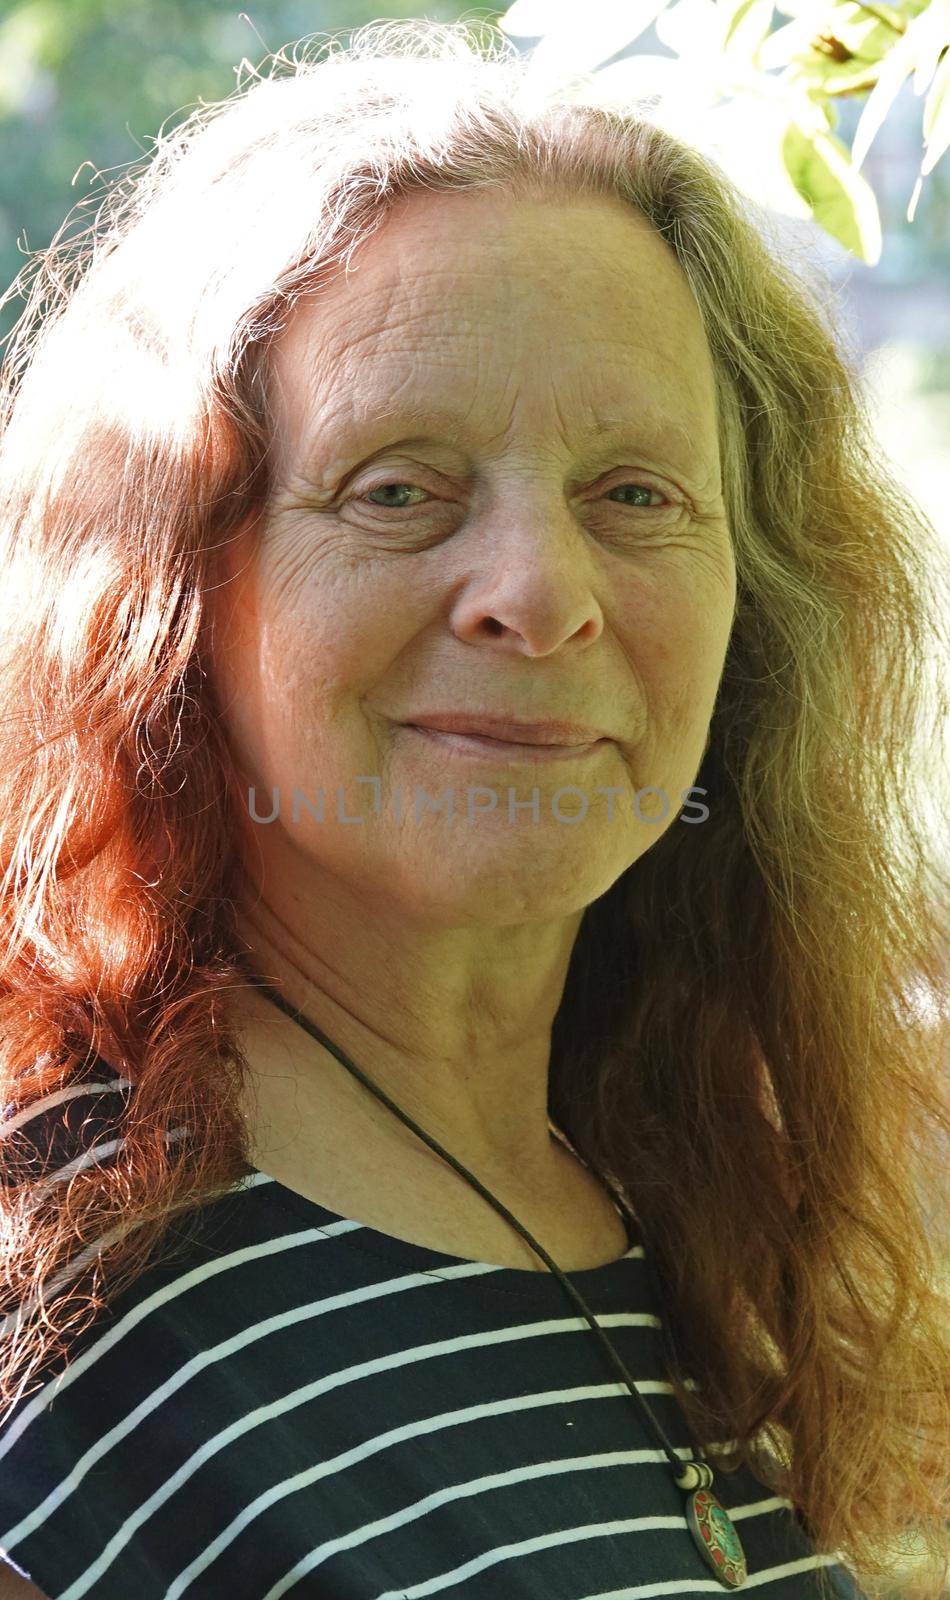 Portrait of a smiling elderly lady without make-up. Her hair is mixed coloured: grey and red. She has wrinkles in her face and is wearing a striped shirt.